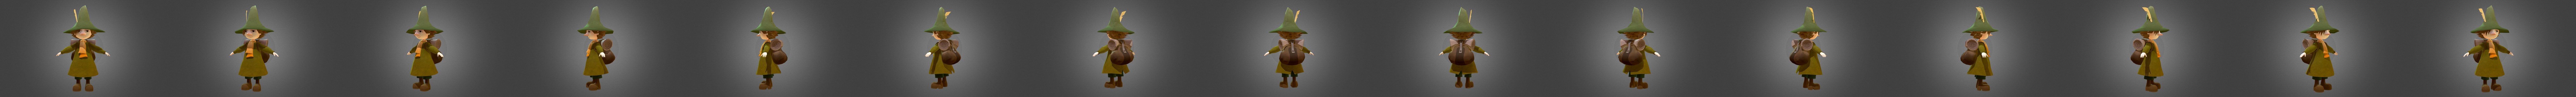 Sunky 2 - Download Free 3D model by Sonic stuff [f119837] - Sketchfab